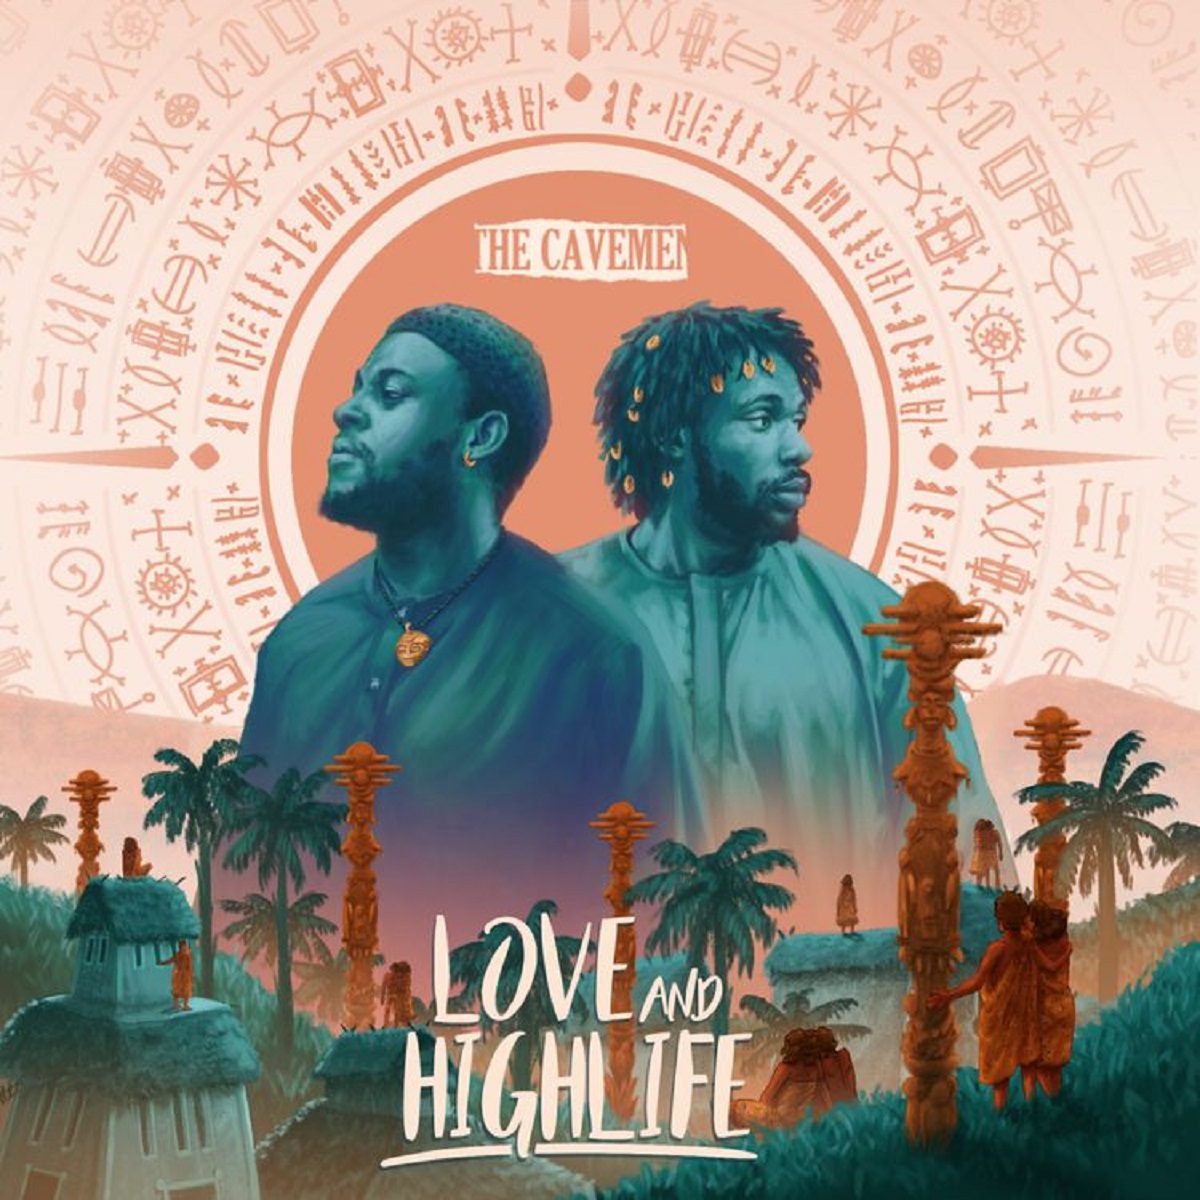 THE CAVEMEN Love and Highlife Album Cover